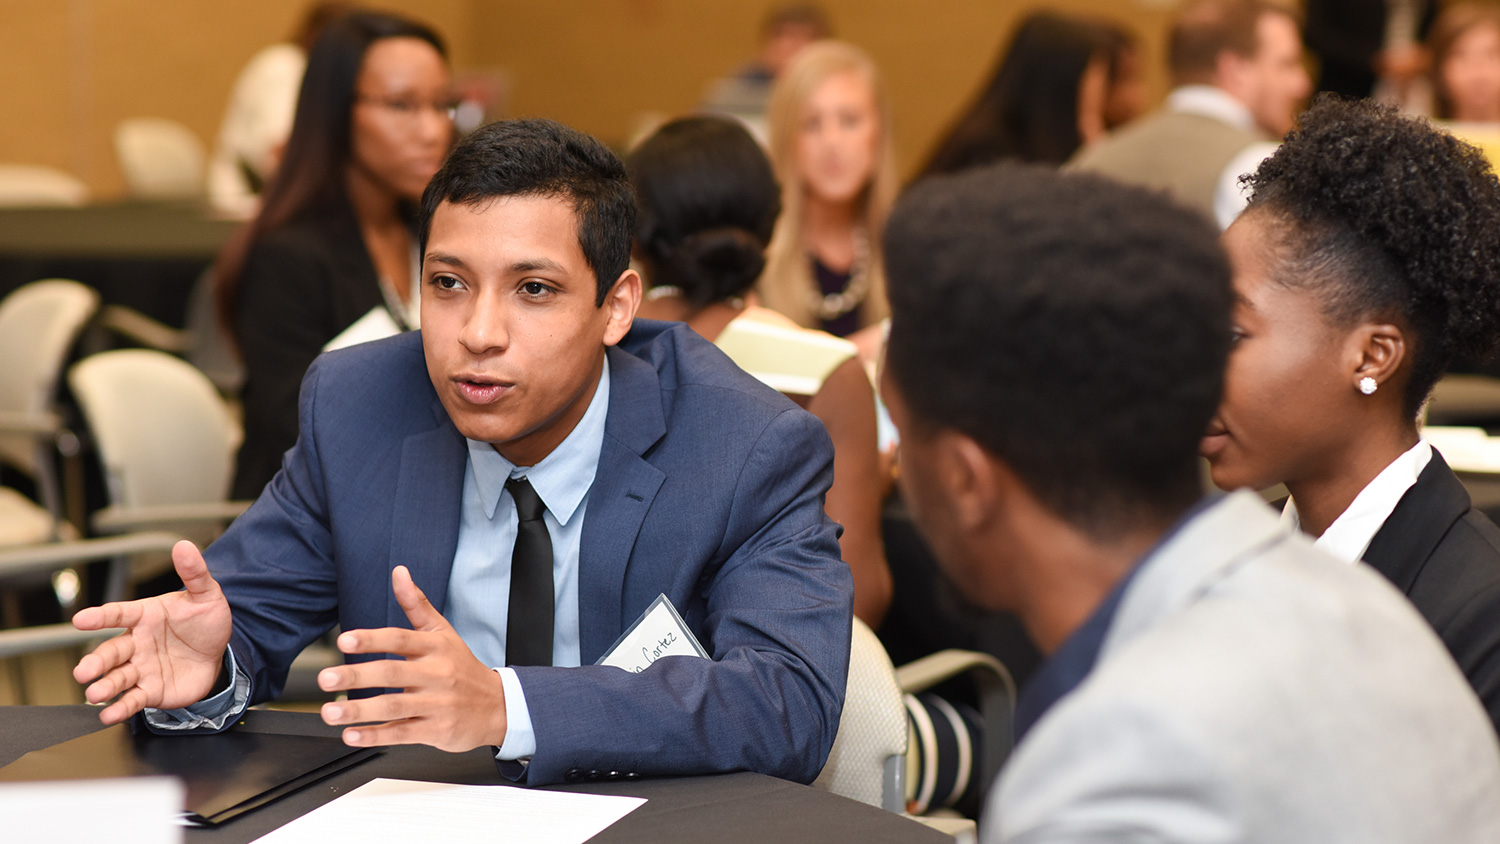 VF is sponsoring Poole College’s 2018 Pre-Career Fair breakfast discussion on the topic of diversity and inclusion in business, industry